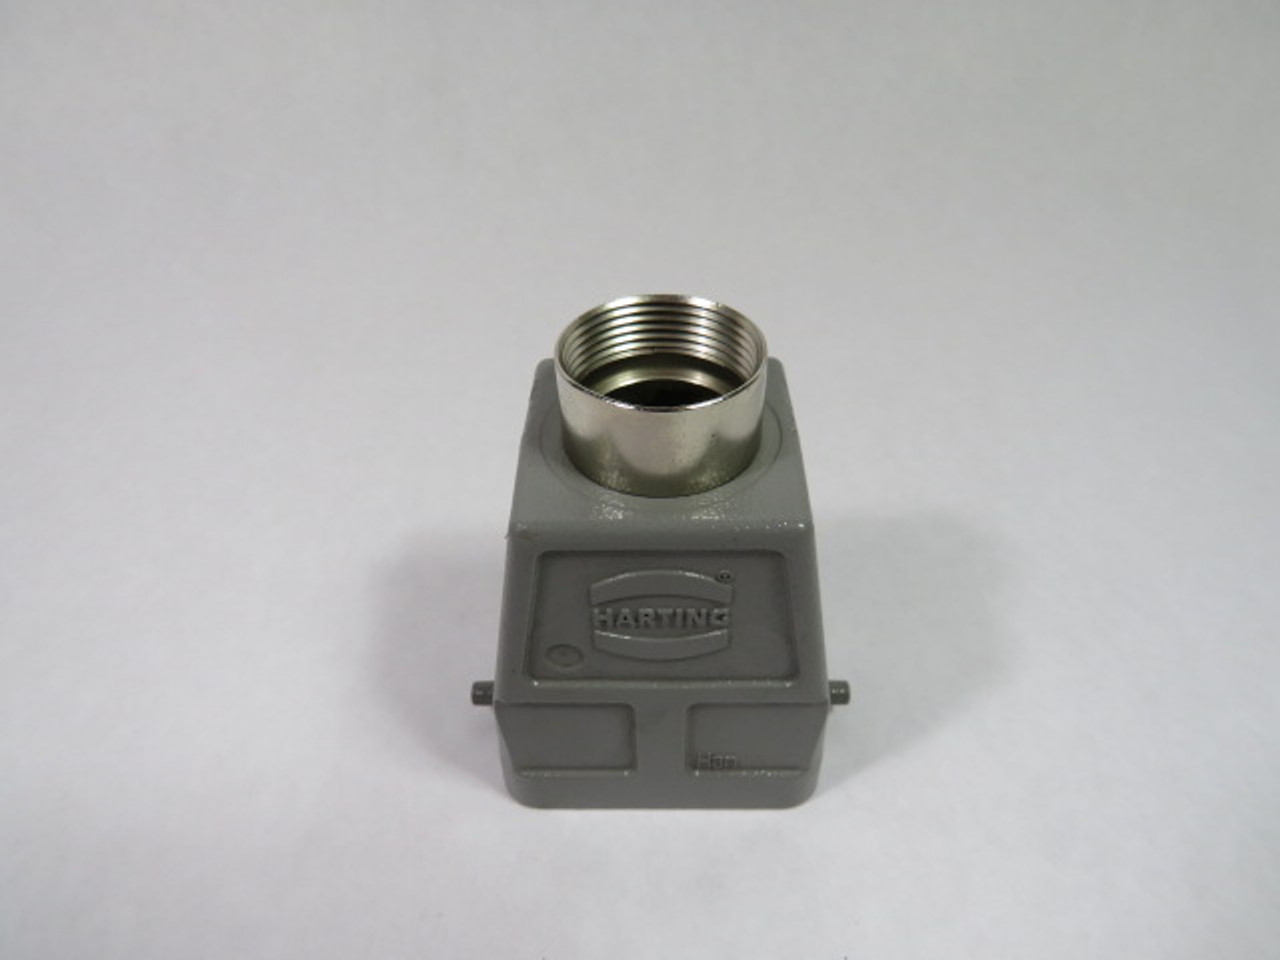 Harting 09300100422 HAN10B-HTE-PG21 Top Entry Hood Connector Housing USED